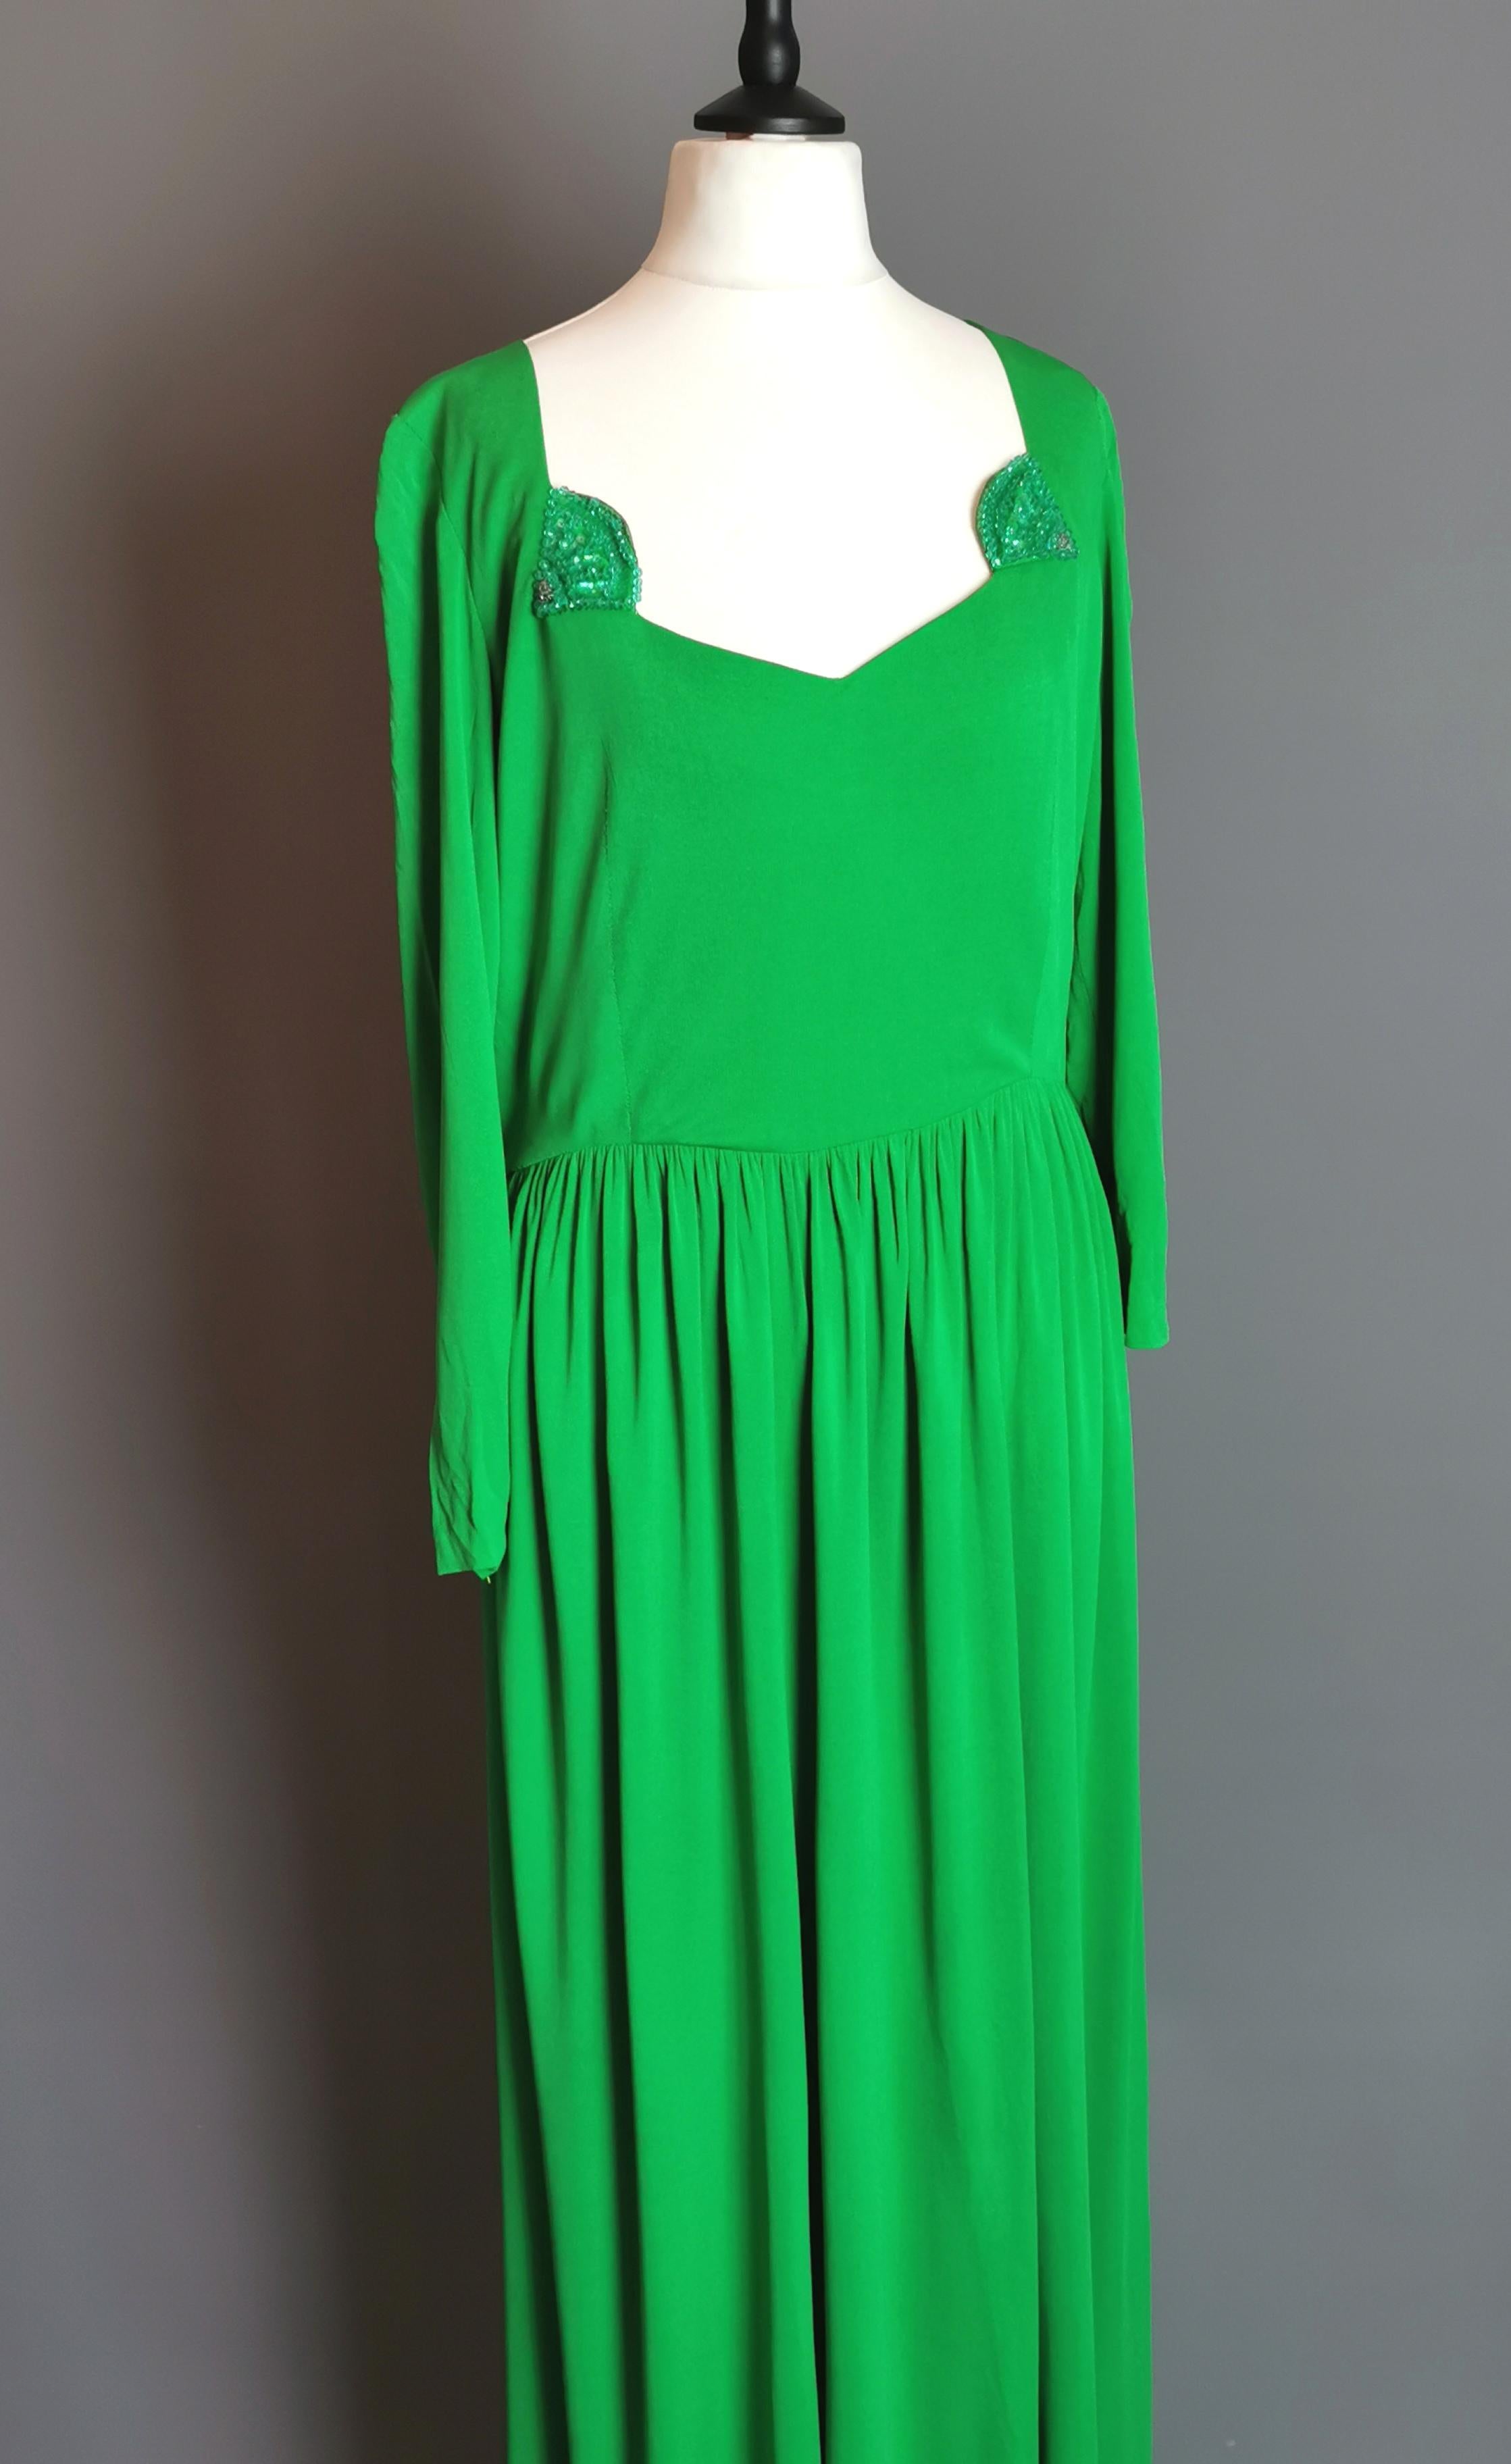 A gorgeous vintage late 1960s long length cocktail dress.

This is a stunning vintage dress, long sweeping ankle length skirts with a more fitted bodice and slim sleeves, the dress has a squared sweetheart style neckline.

Embellished at the corners